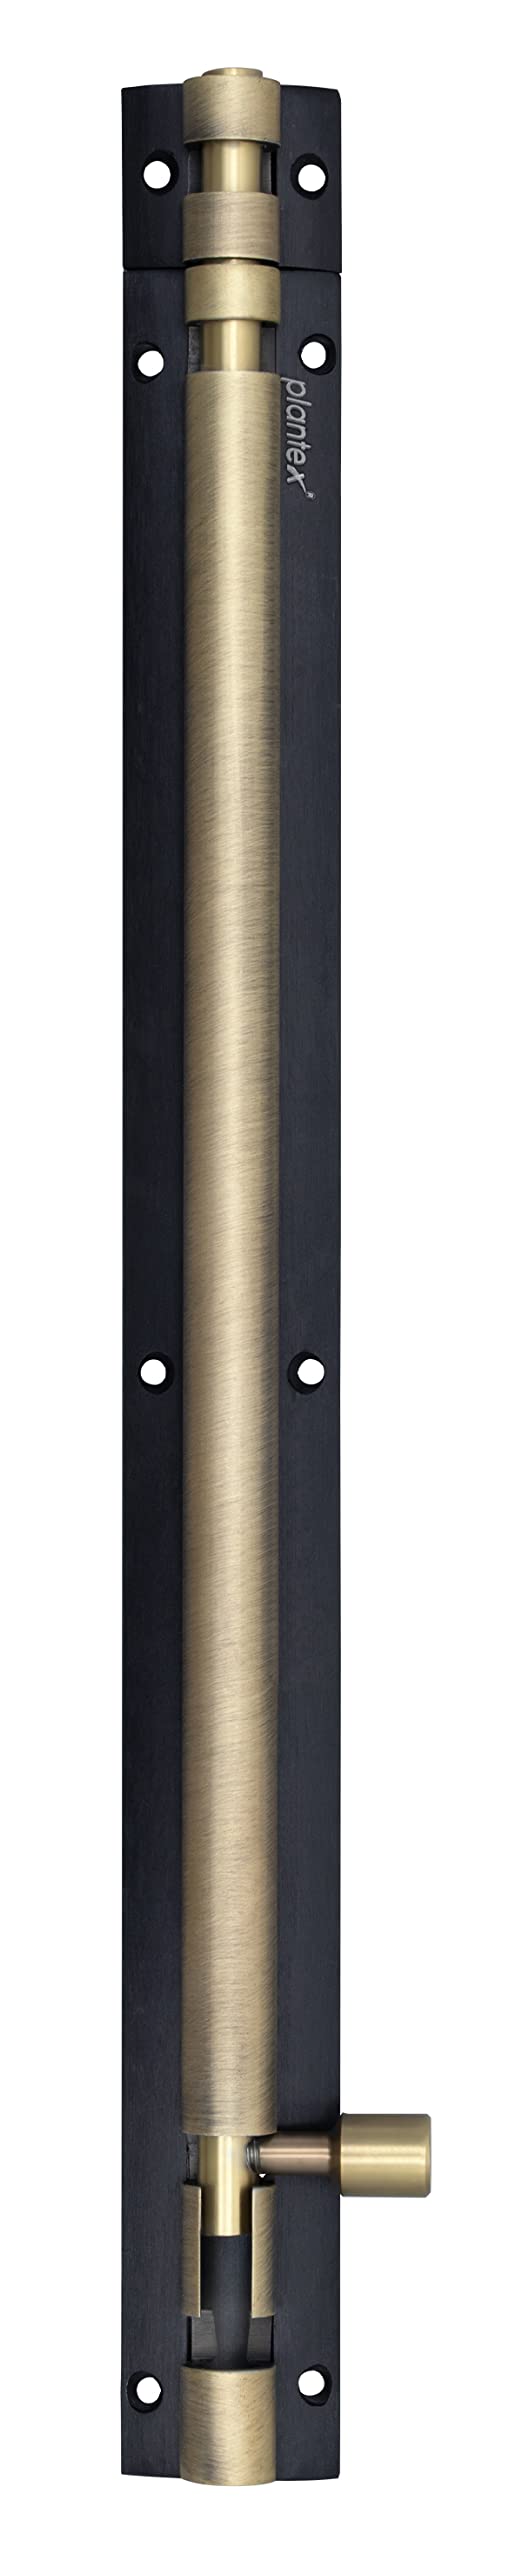 Plantex Heavy Duty 12-inch Joint-Less Tower Bolt for Wooden and PVC Doors for Home Main Door/Bathroom/Windows/Wardrobe - Pack of 2 (703, Brass Antique and Black)